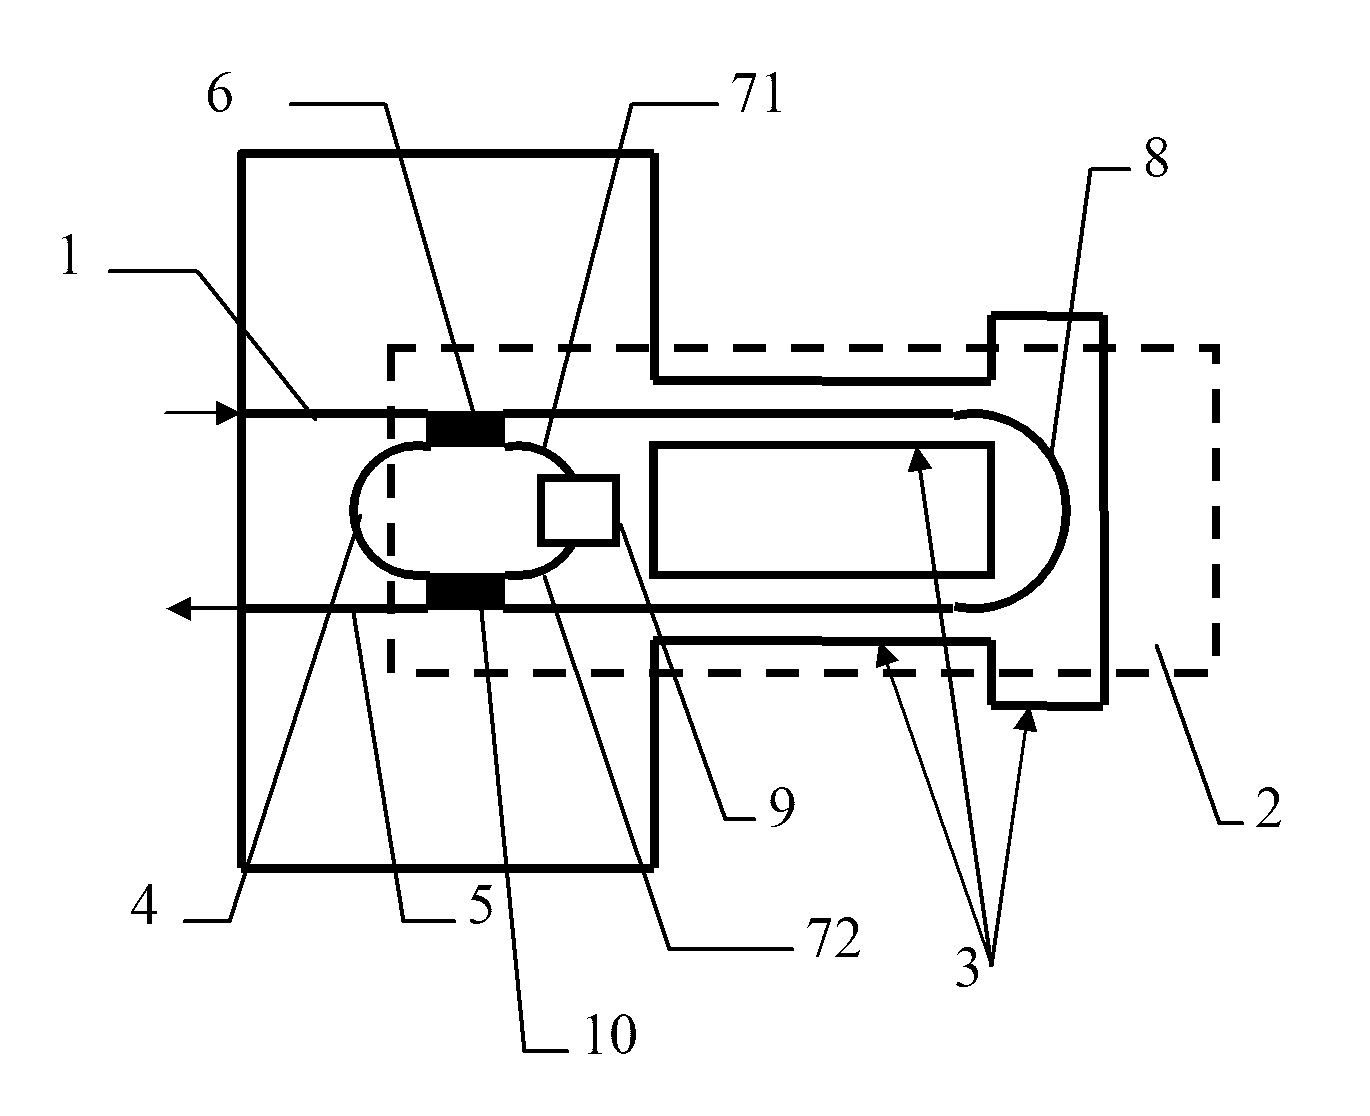 Cantilever beam structural resonant-type integrated optical waveguide accelerometer